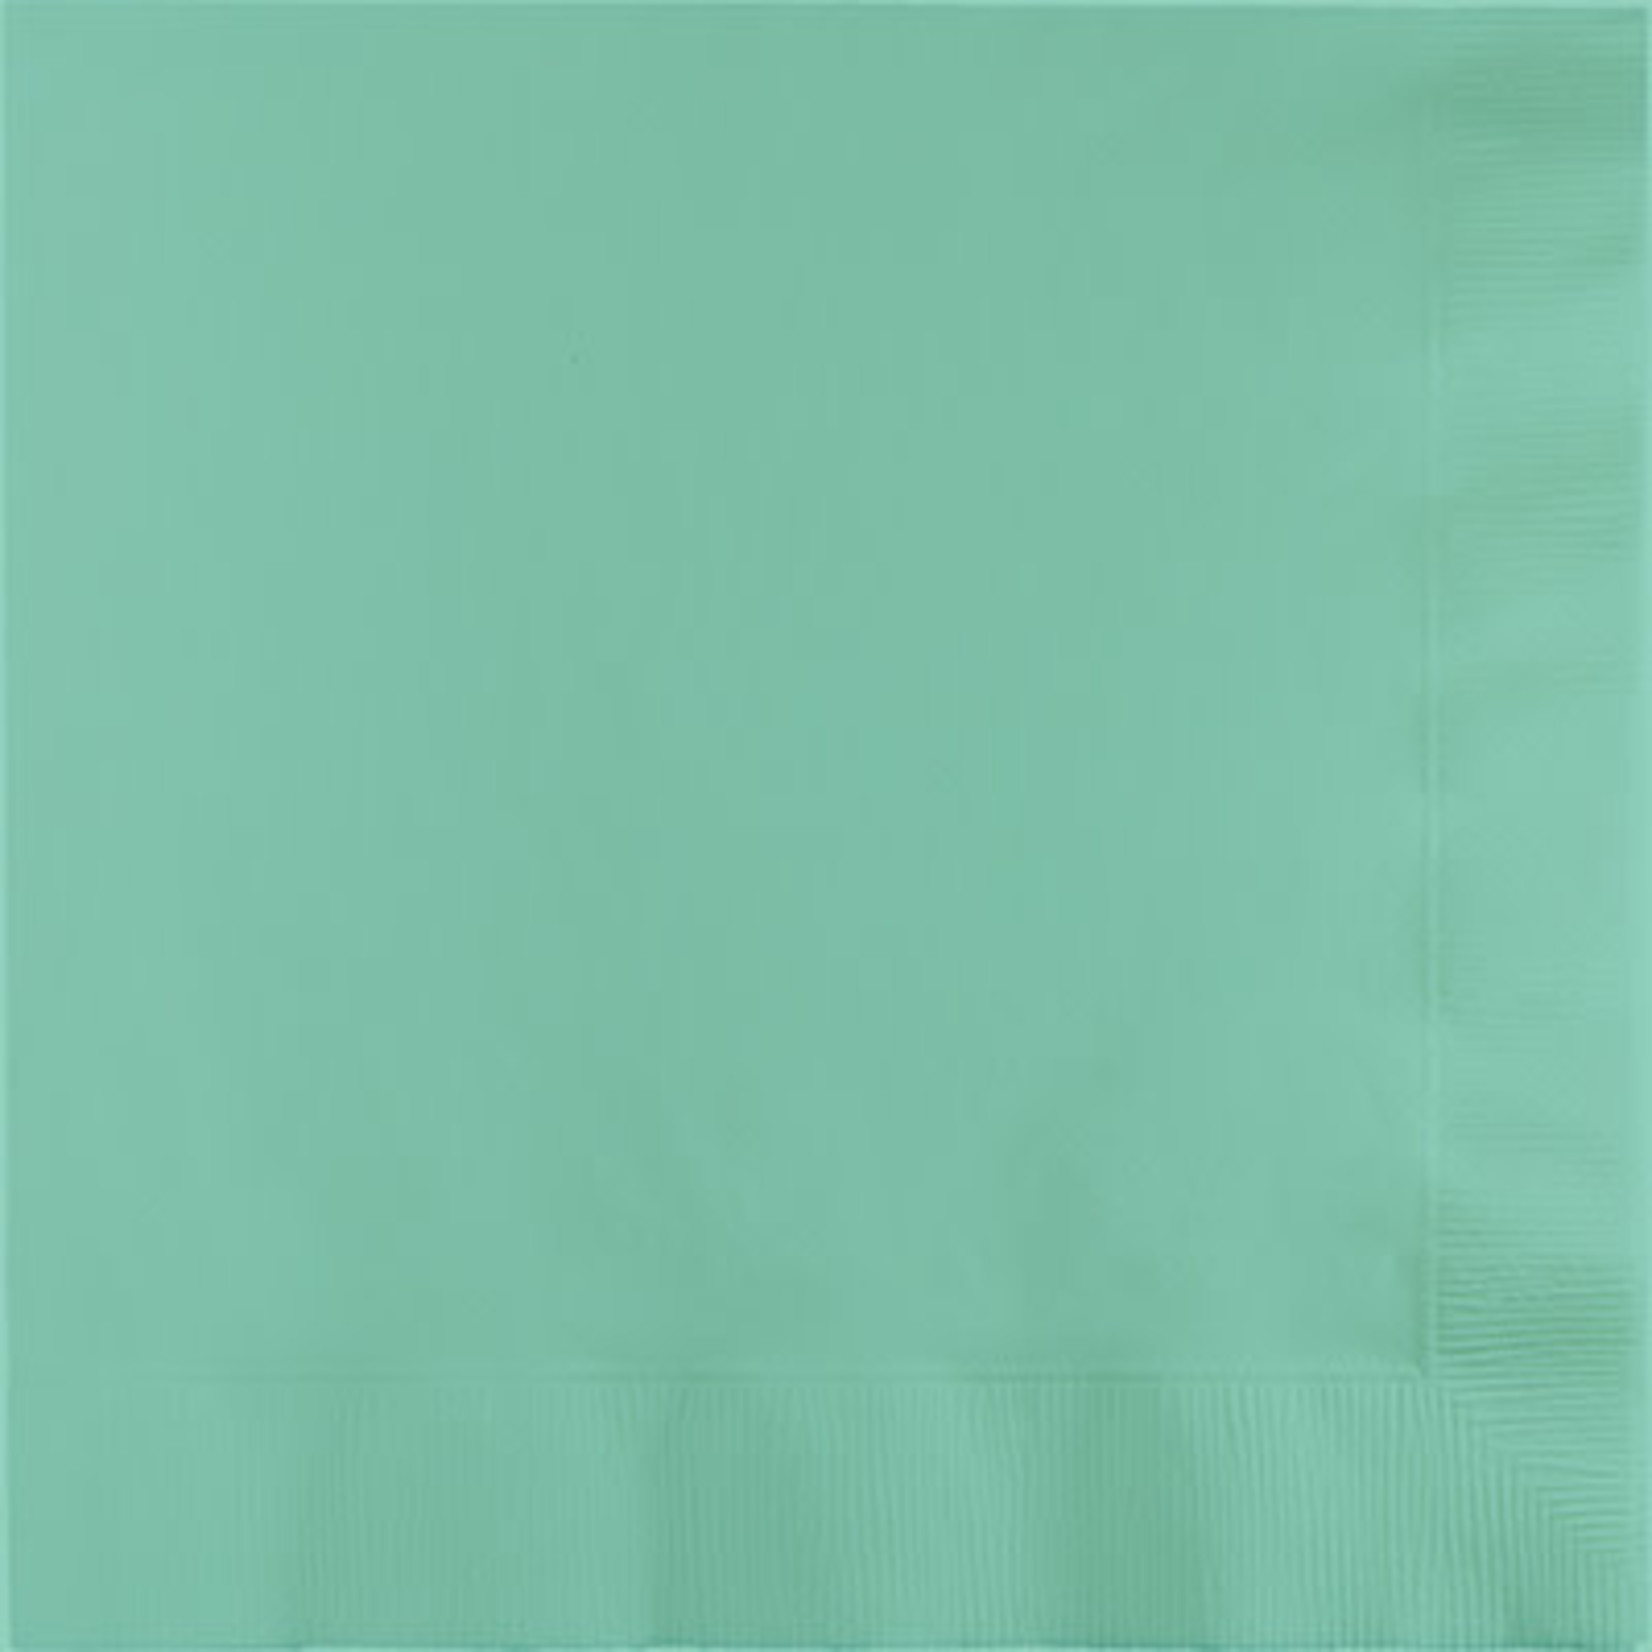 Touch of Color Mint Green 3-Ply Dinner Napkins - 25ct.